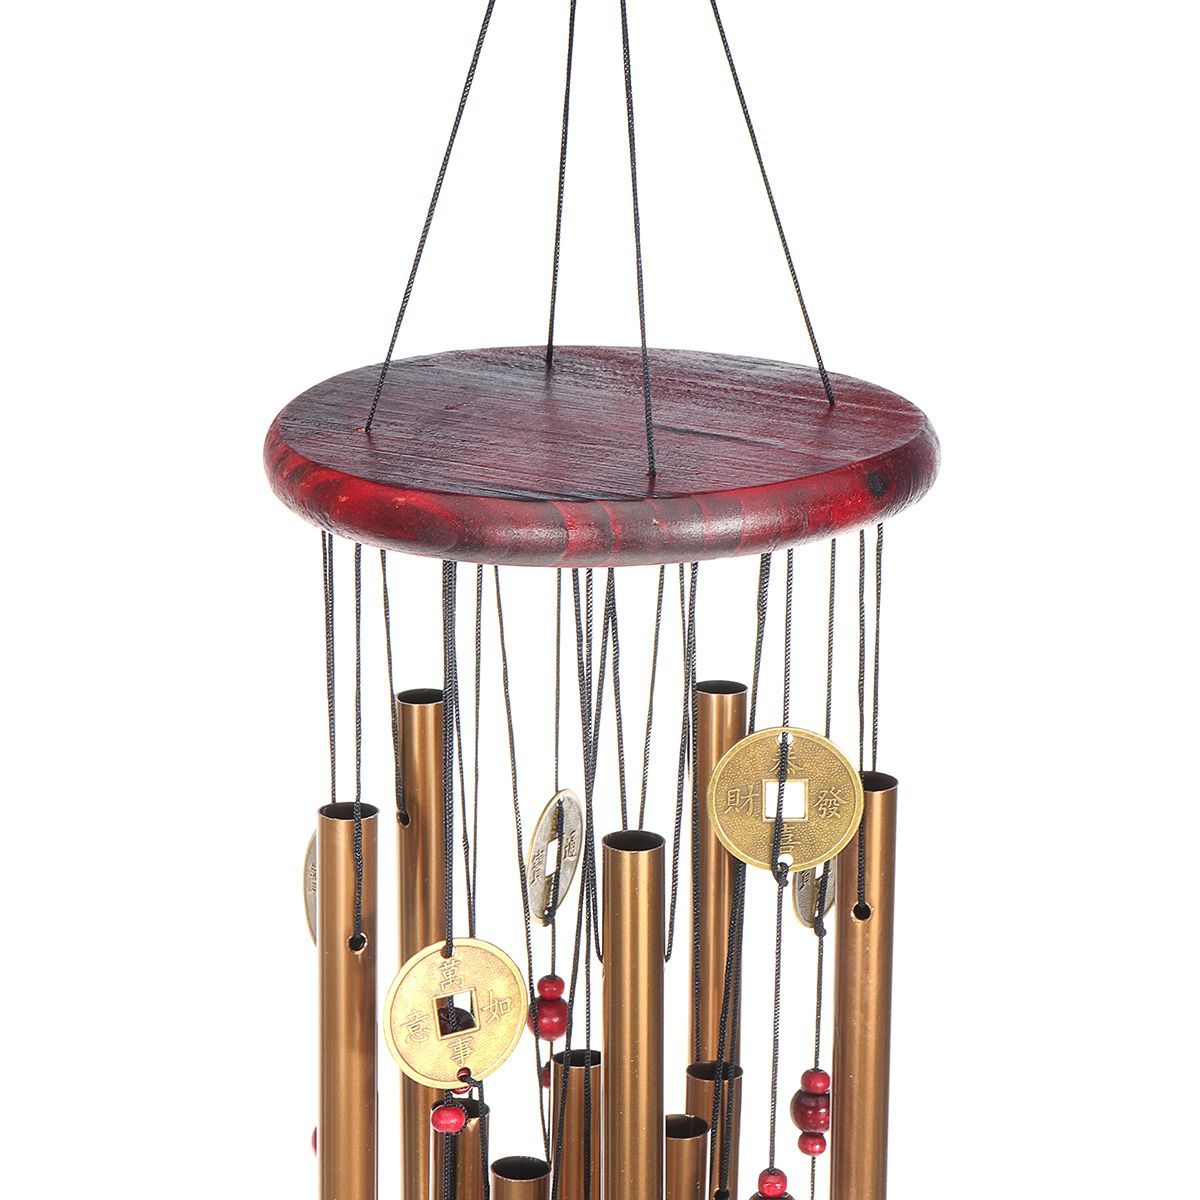 Wind-Chimes-Large-Tone-Resonant-Bell-10-Tubes-Chapel-Church-Garden-Decor-33quot-1694339